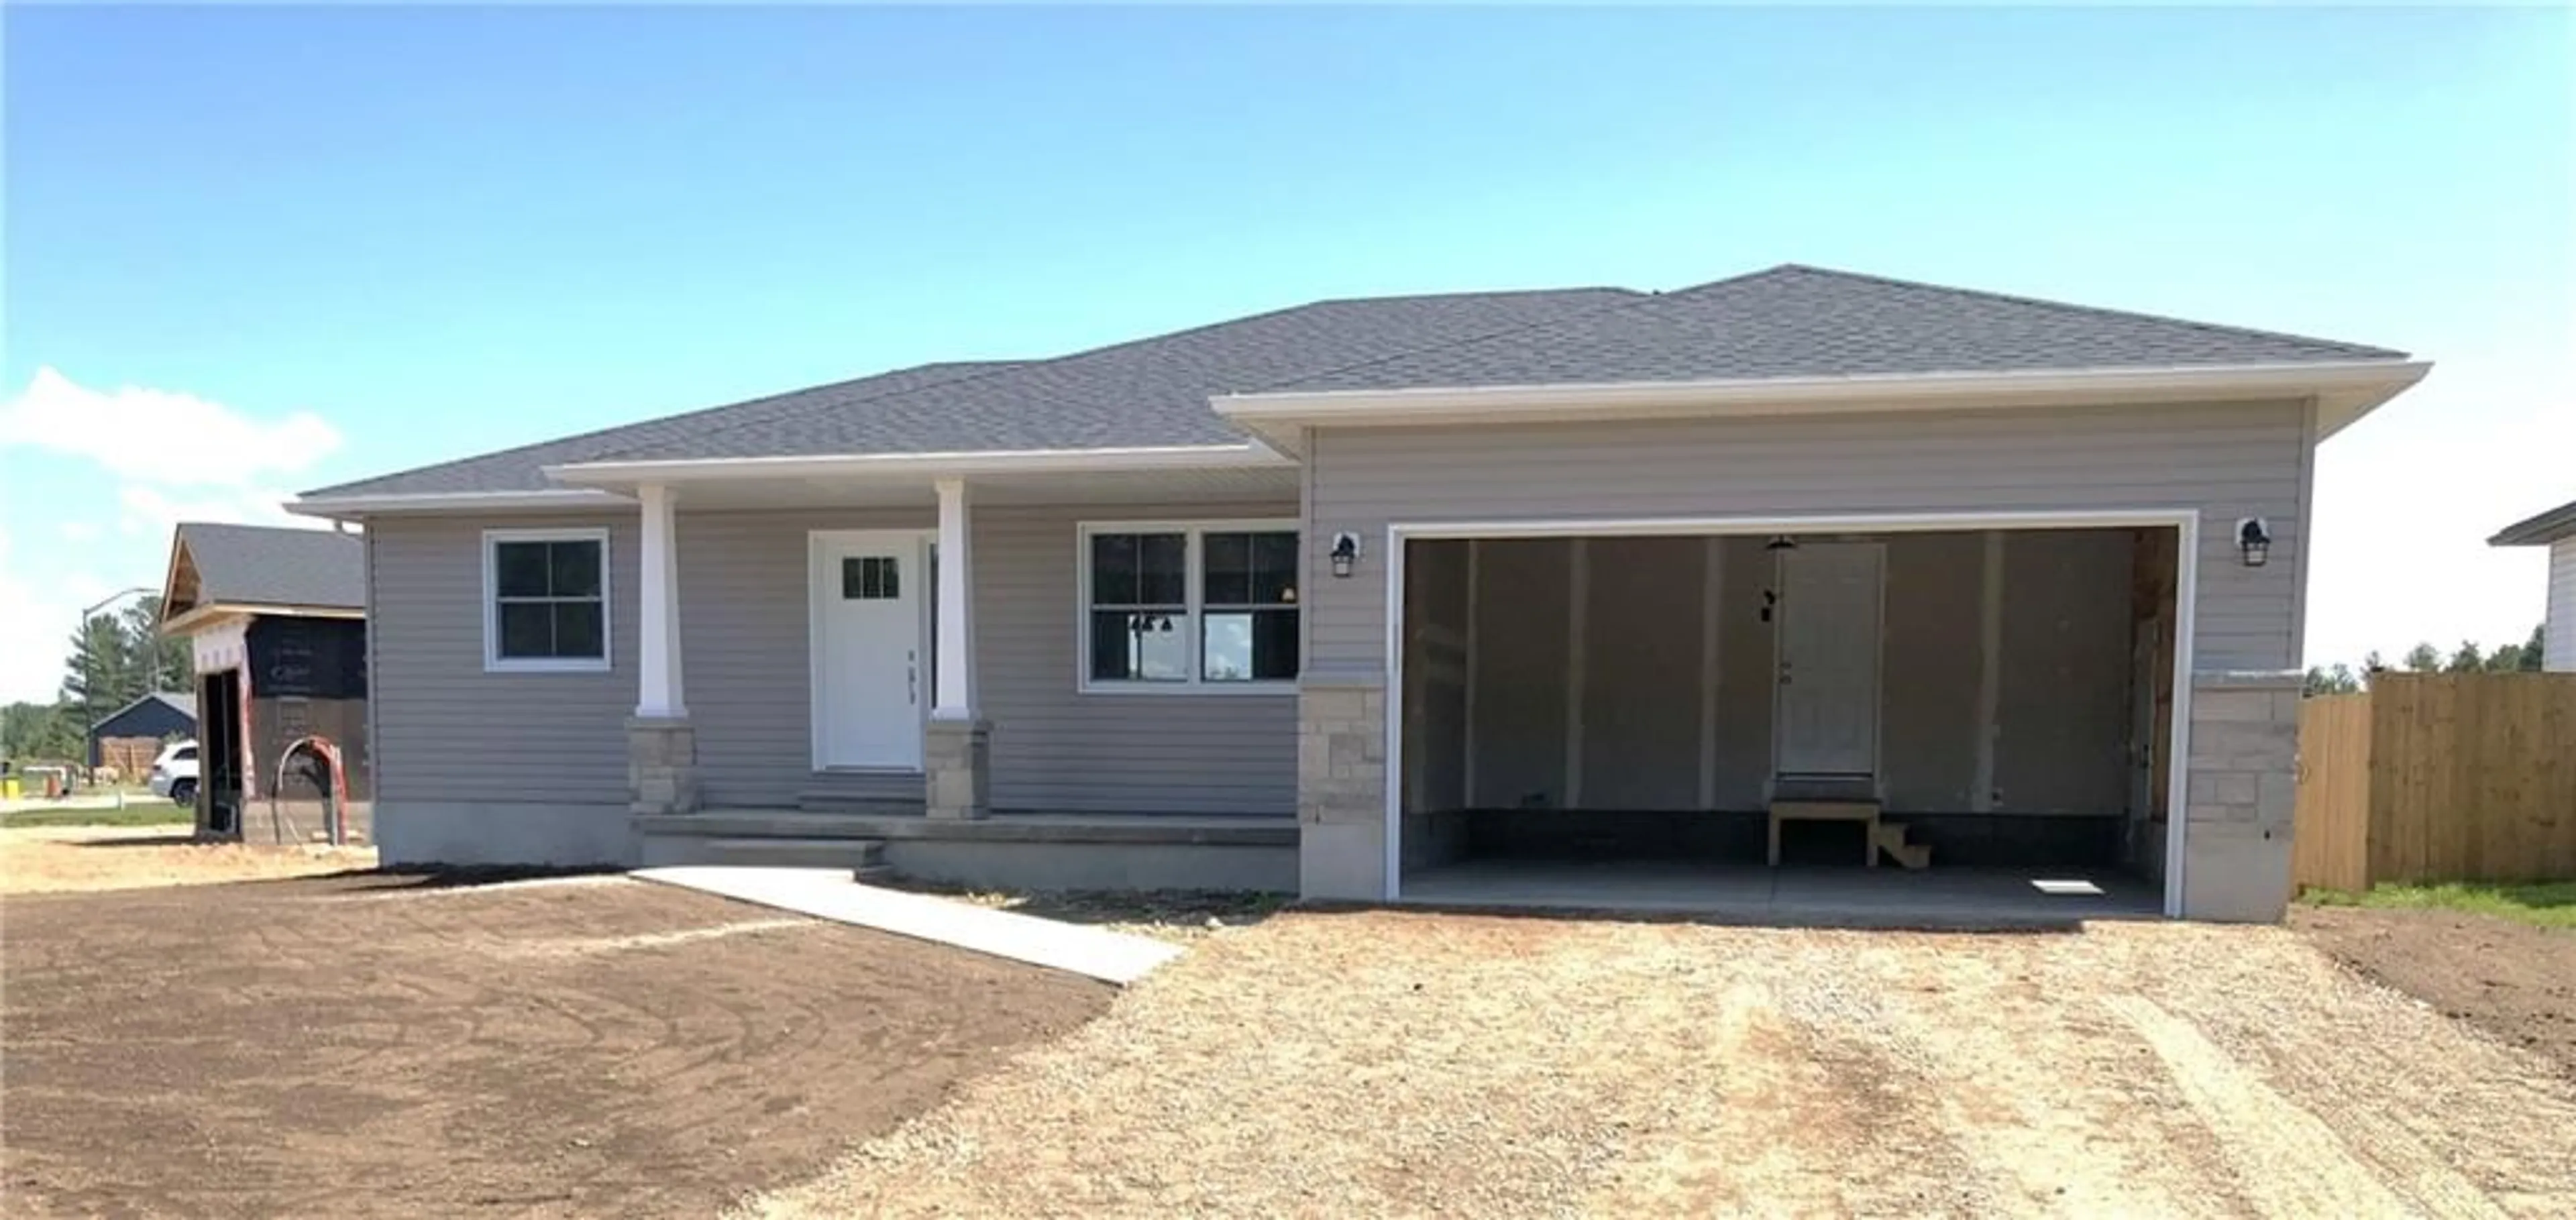 Home with vinyl exterior material for 20 DURANT St, Petawawa Ontario K8H 0H3